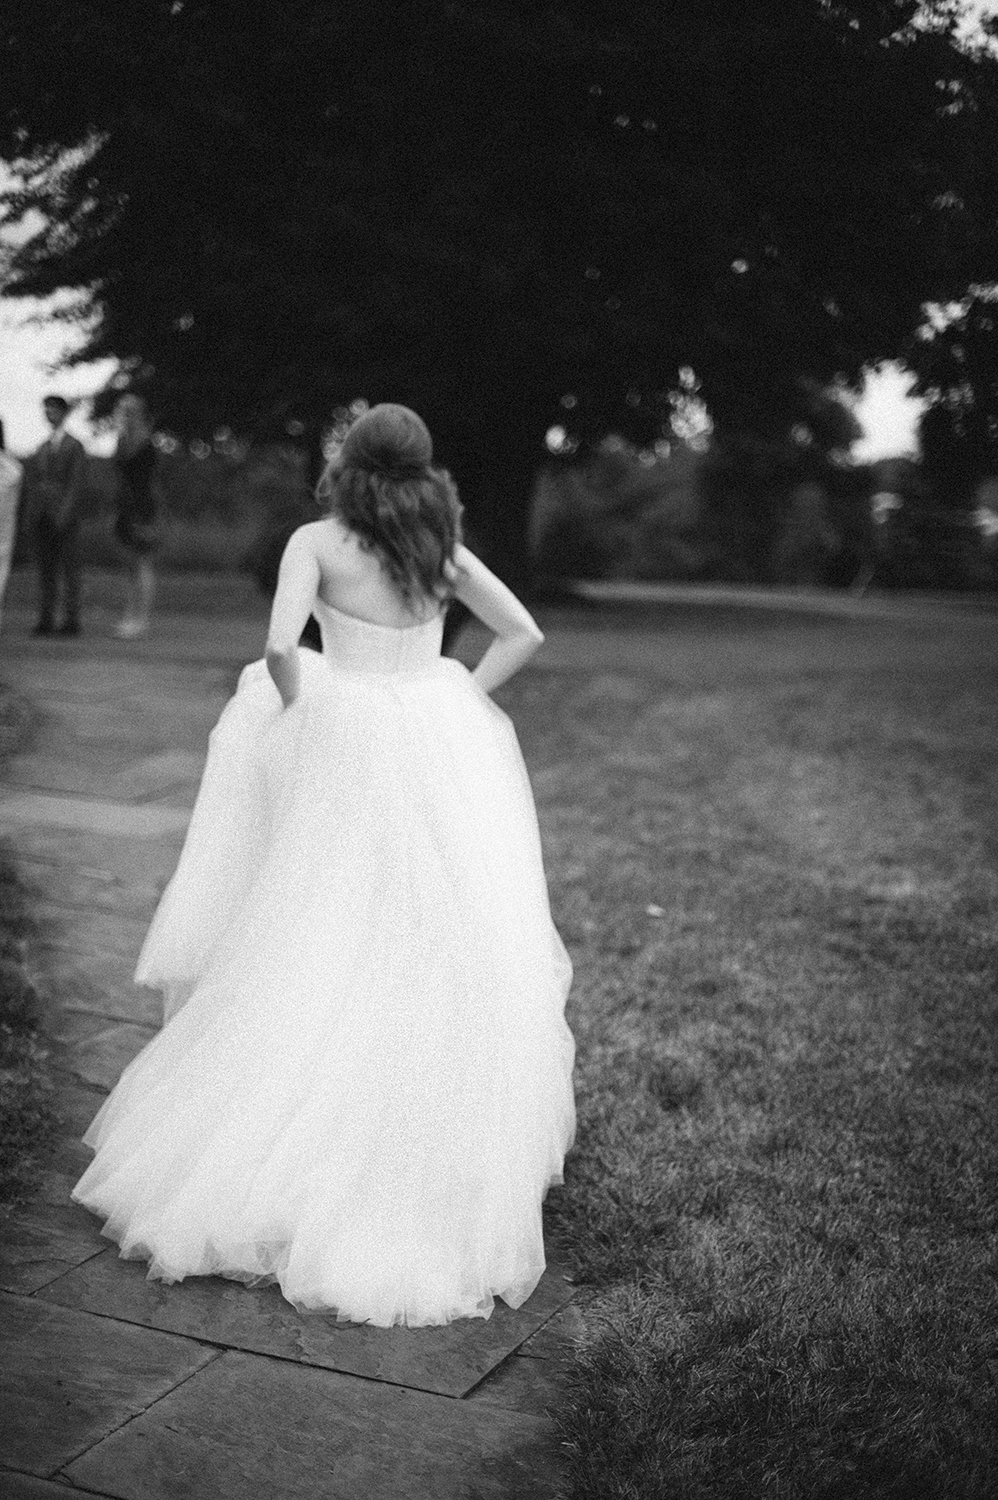 Bride in tulle dress running in black and white